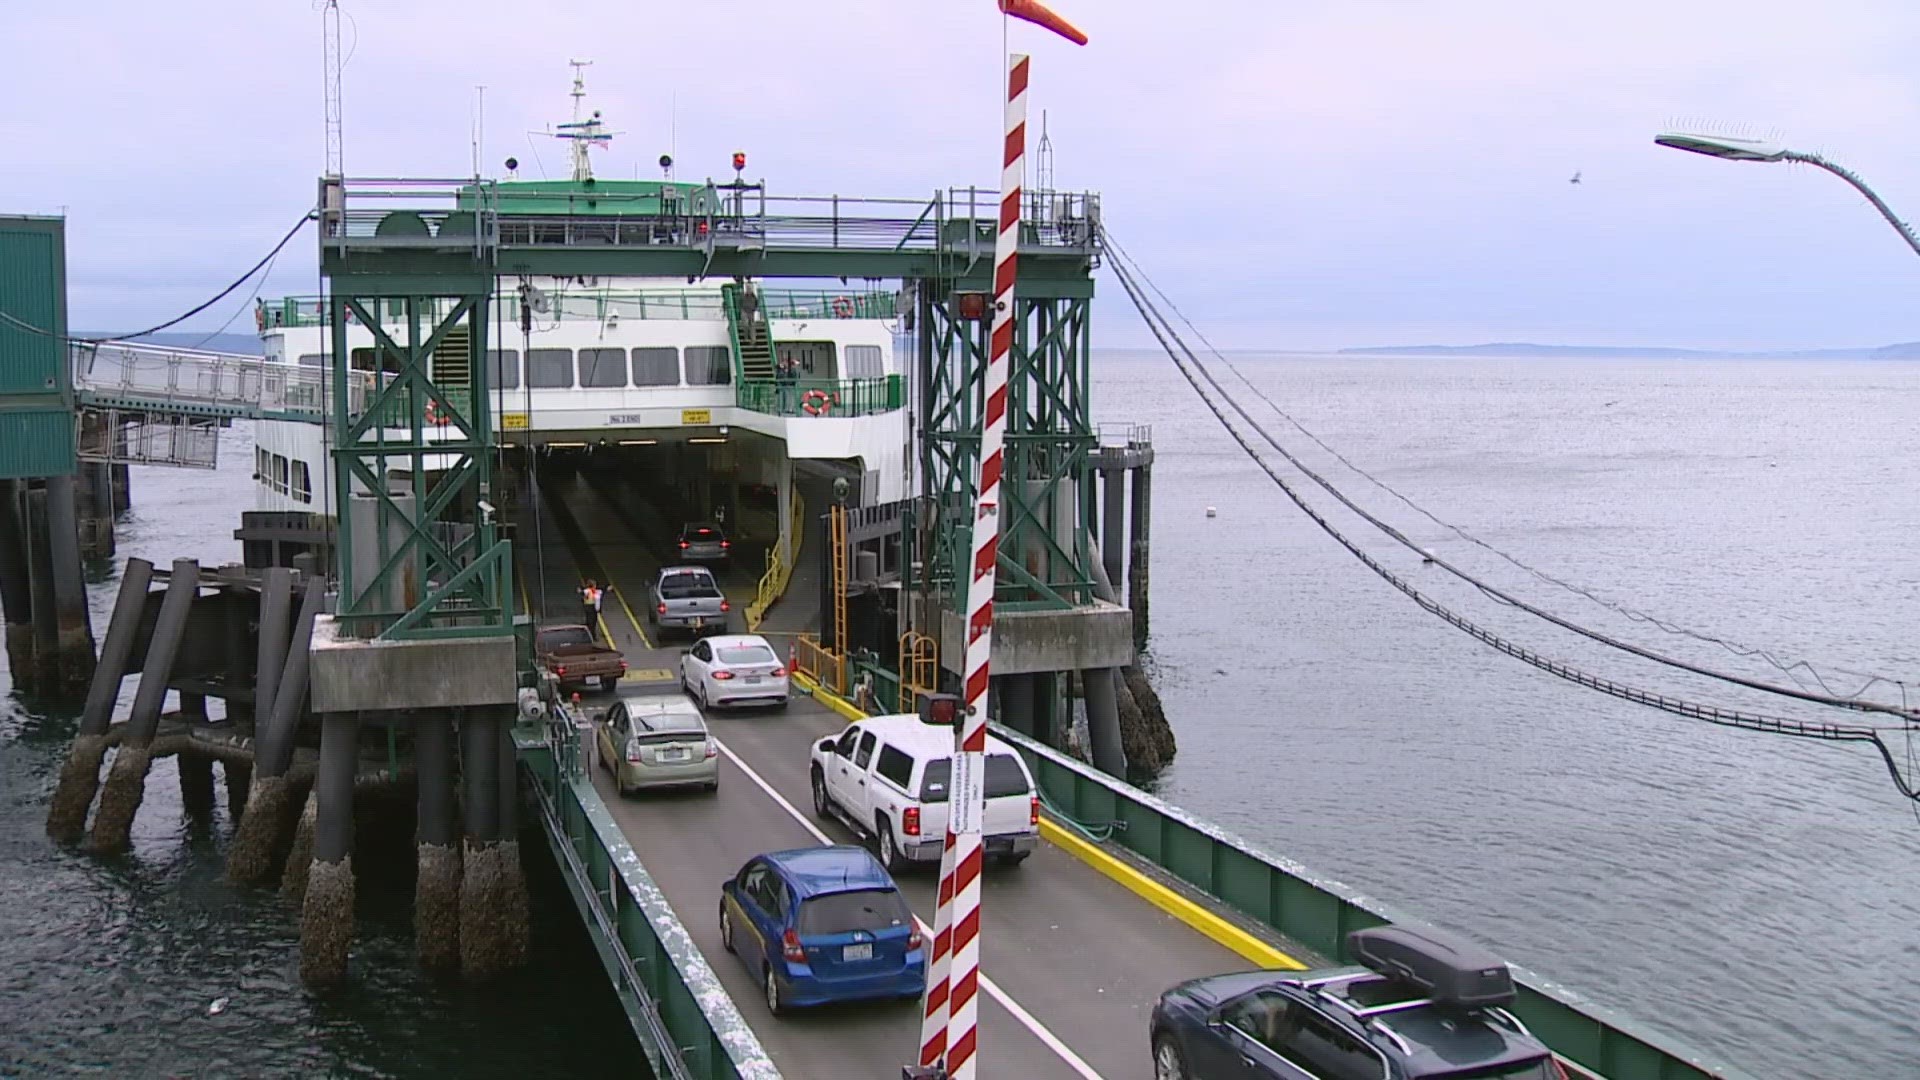 One ferry worker who was part of the rotation of people doing chest compressions on the man spoke to KING 5 about the experience.